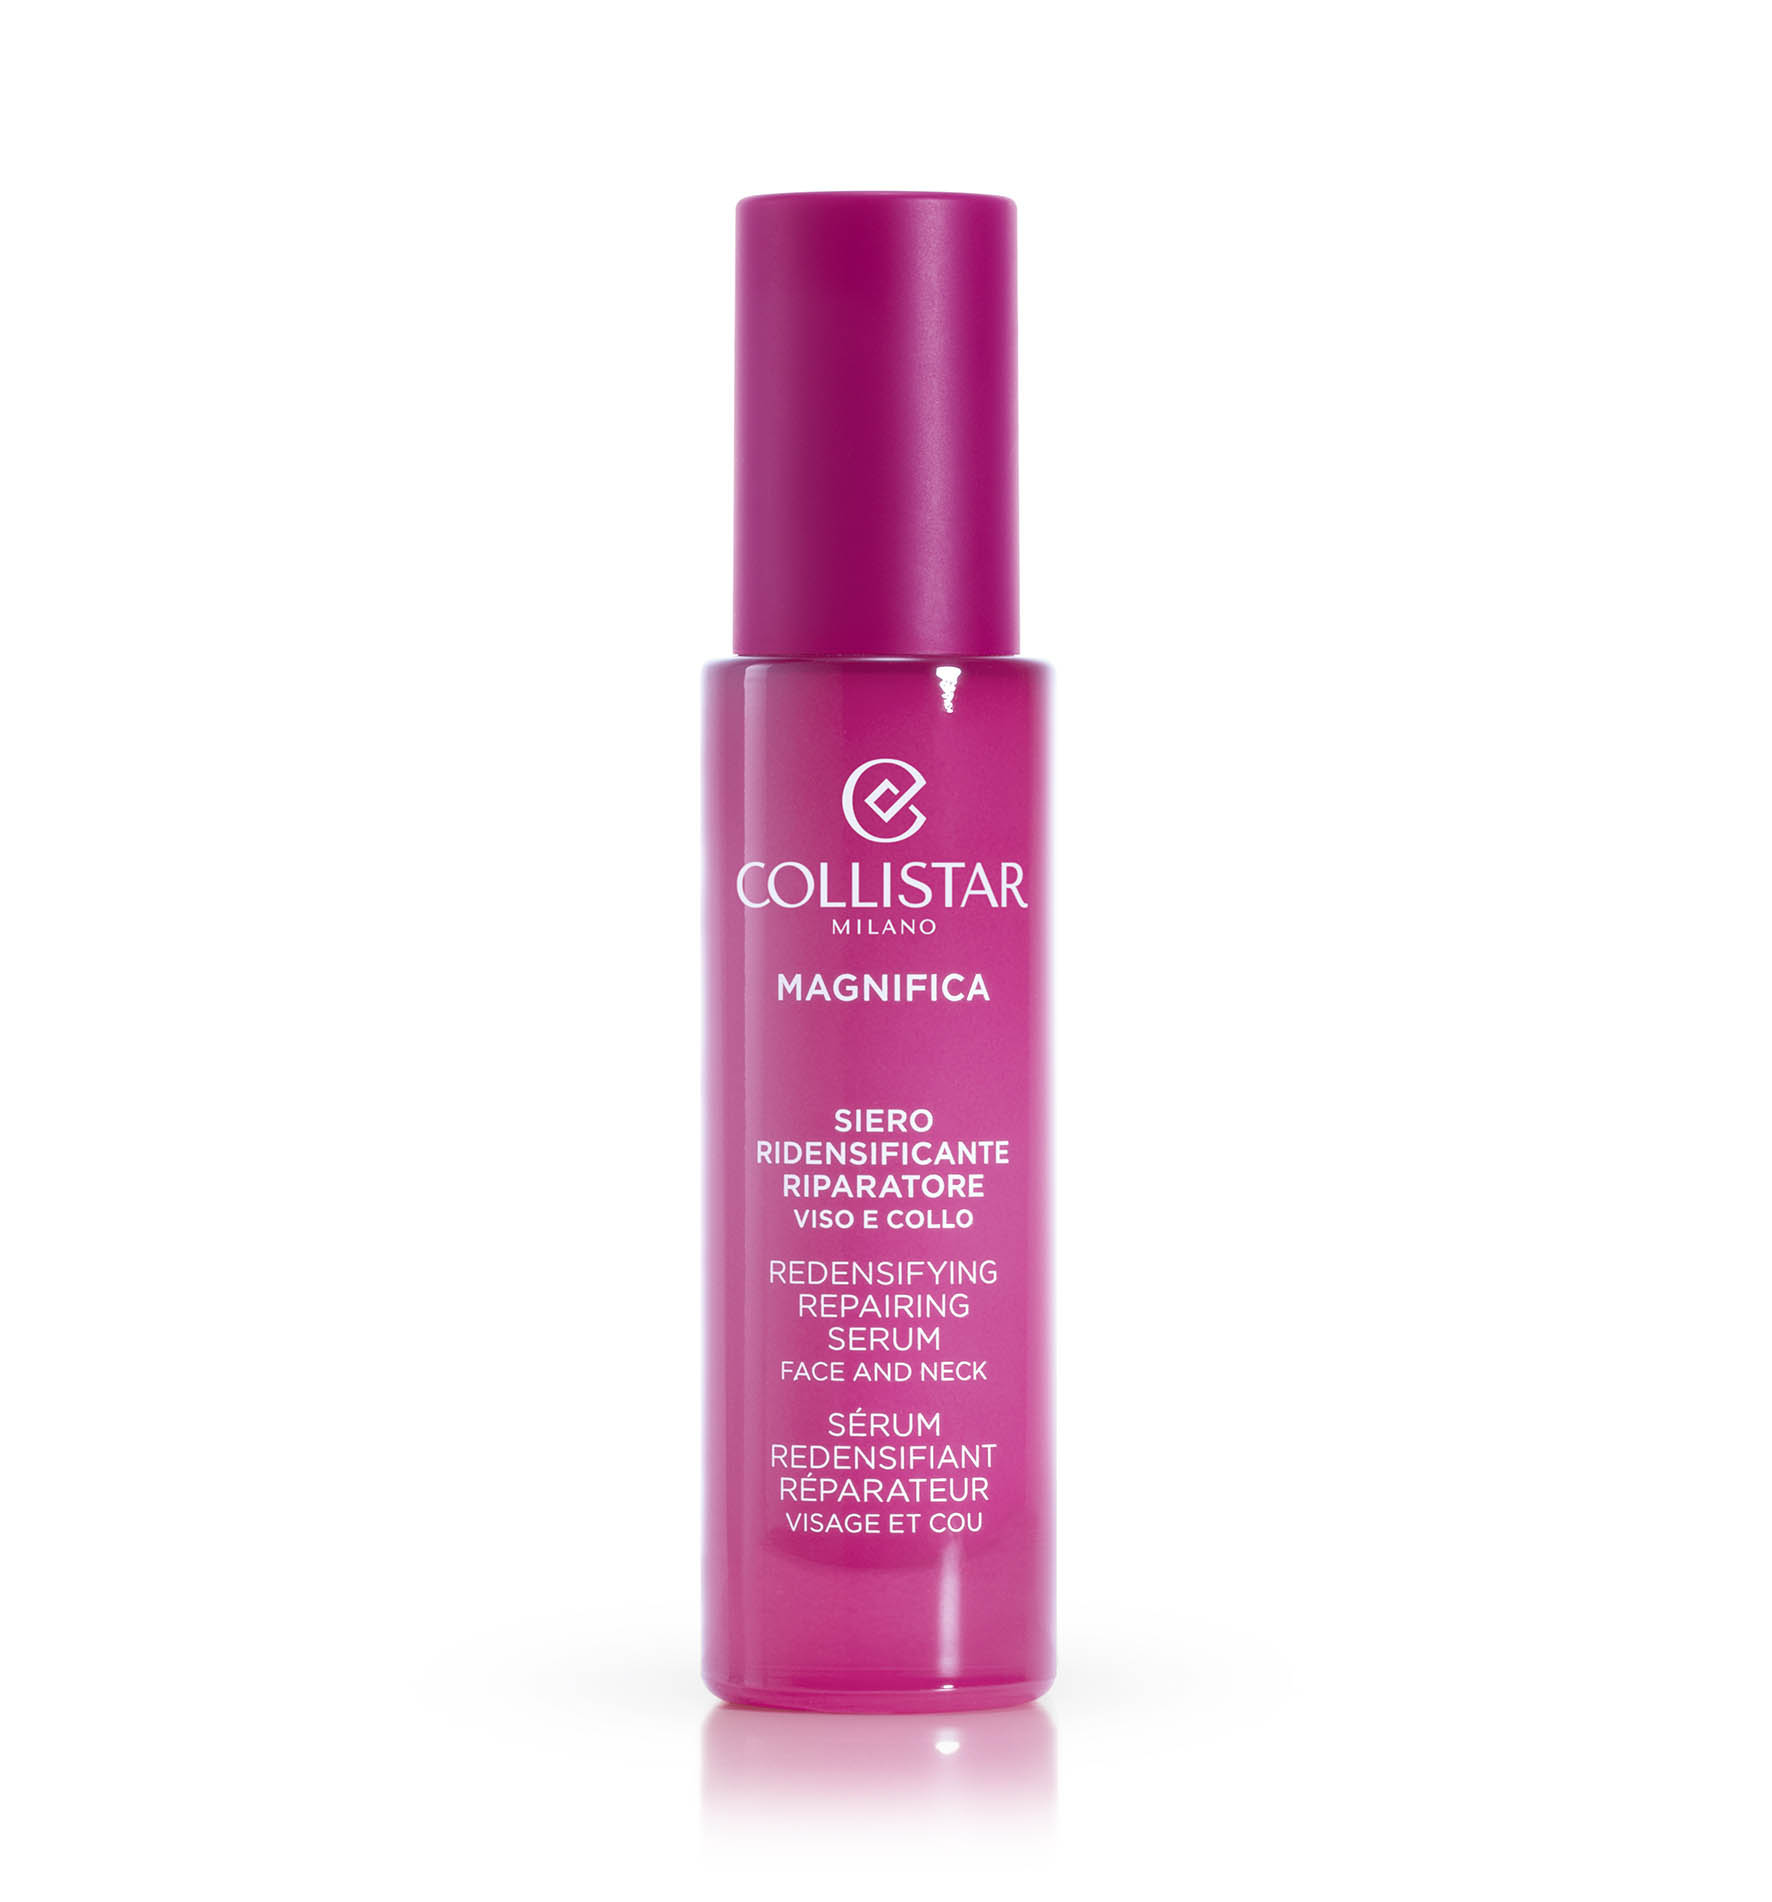 MAGNIFICA REDENSIFYING REPAIRING SERUM FACE AND NECK - Magnifica | Collistar - Shop Online Ufficiale